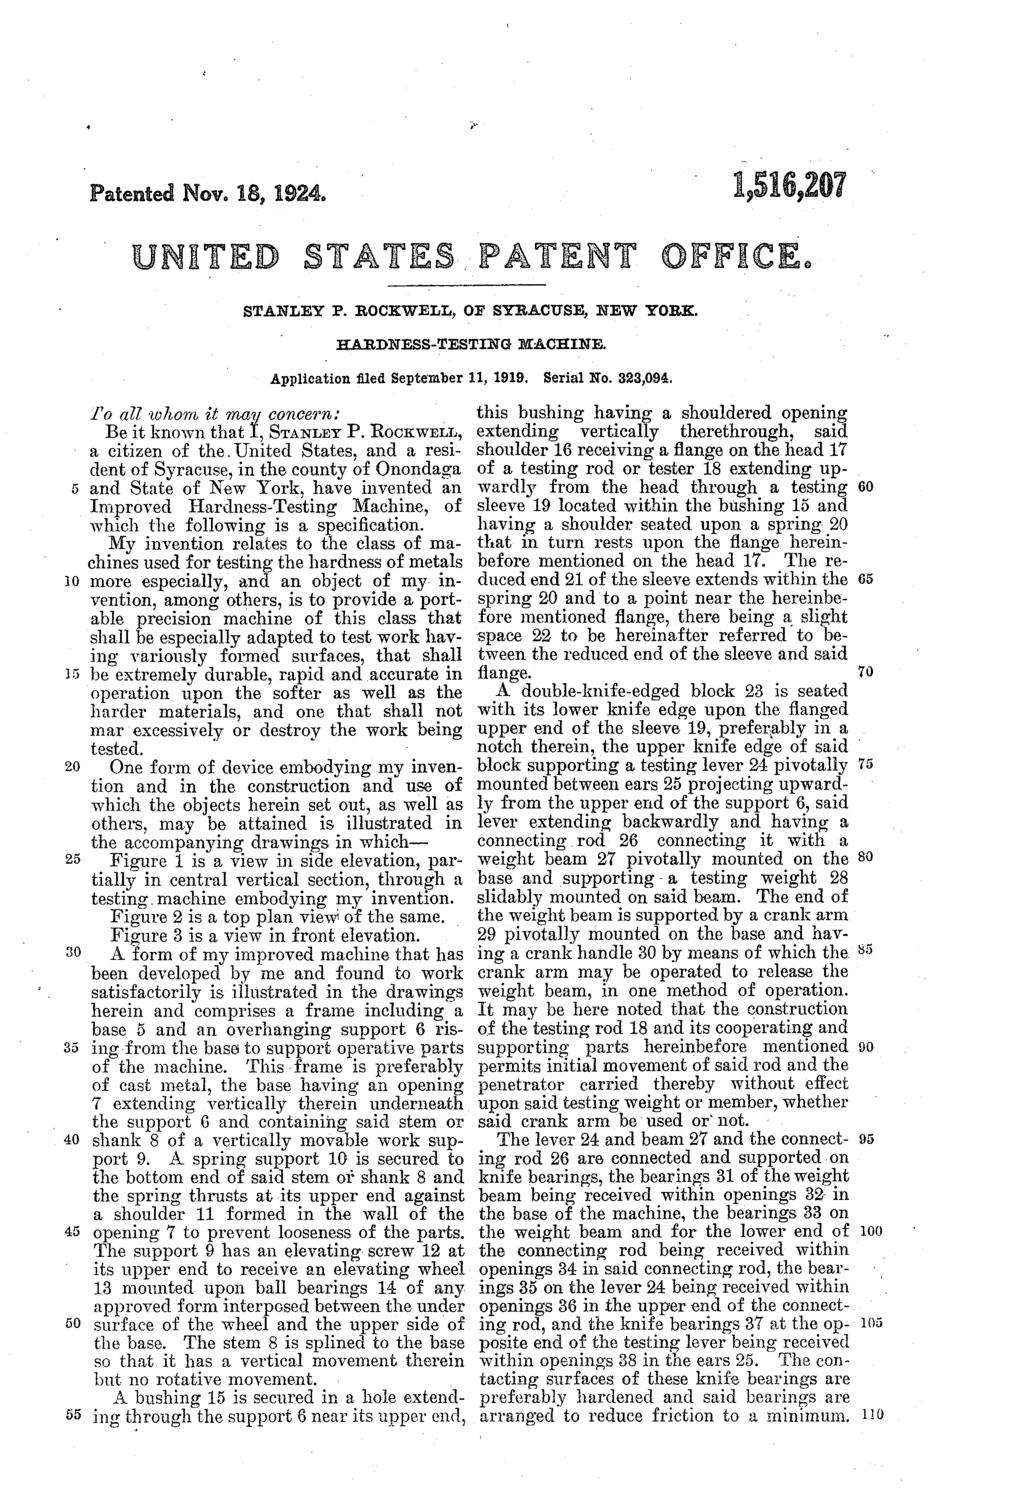 O 2 40 0 Patented Nov. 18, 1924. 1,16,7 UNITED STATES PATENT OFFICE. To all whom it maar concern: STANLEY P. ROCKWELL, OF SYRACUSE, NEW YORK. EARDNESS-ESING ABACENIE.